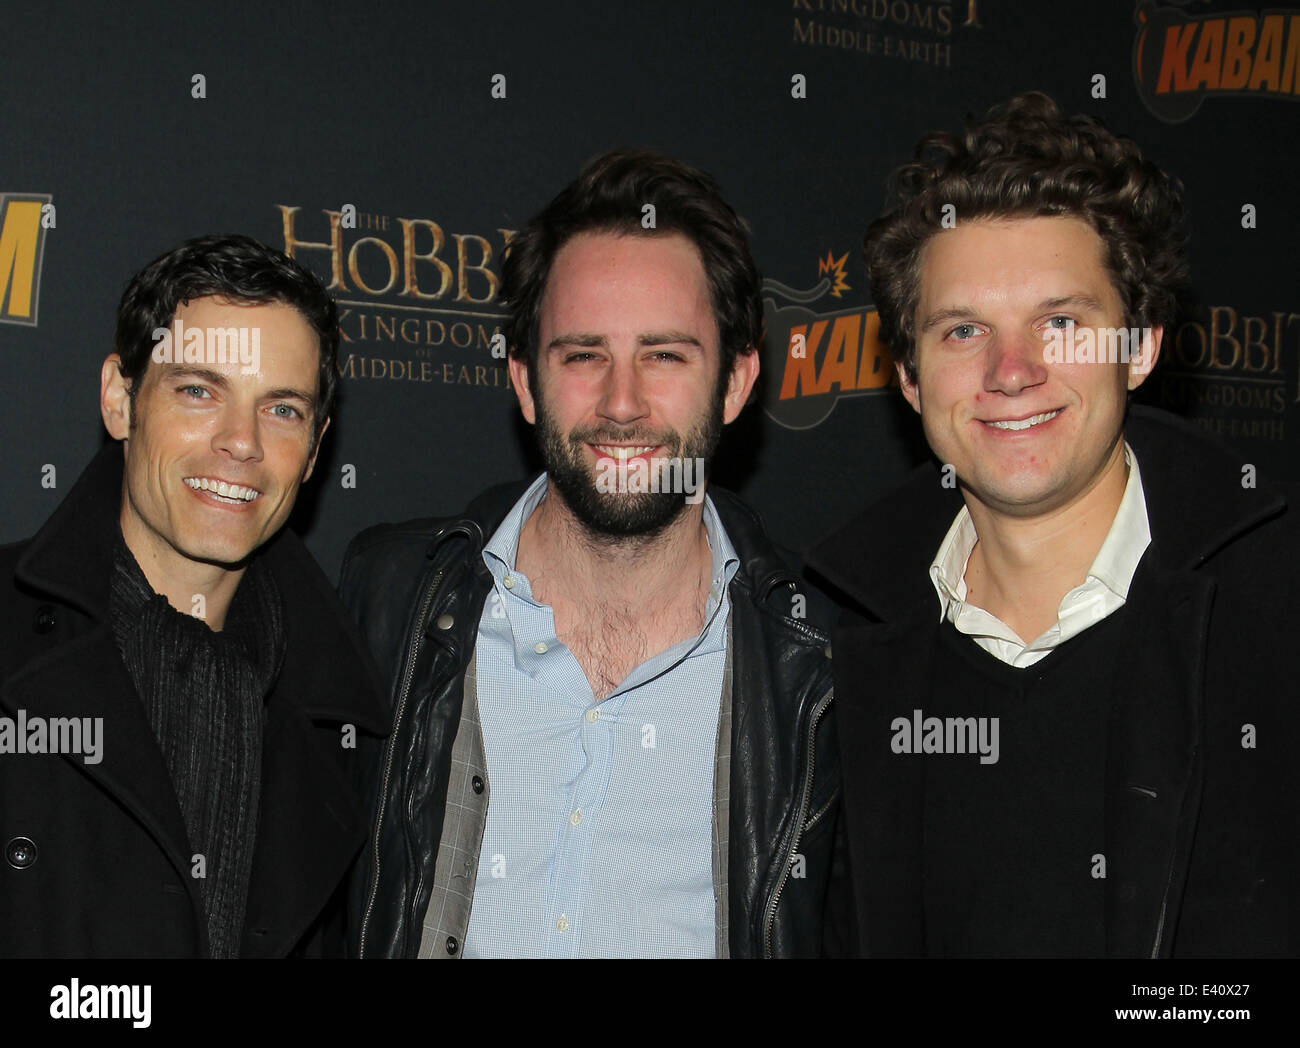 The Hobbit: The Desolation of Smaug Expansion Pack Kabam Mobile Game Launch Party At Eveleigh  Featuring: Drew Murray,Evan Low Stock Photo